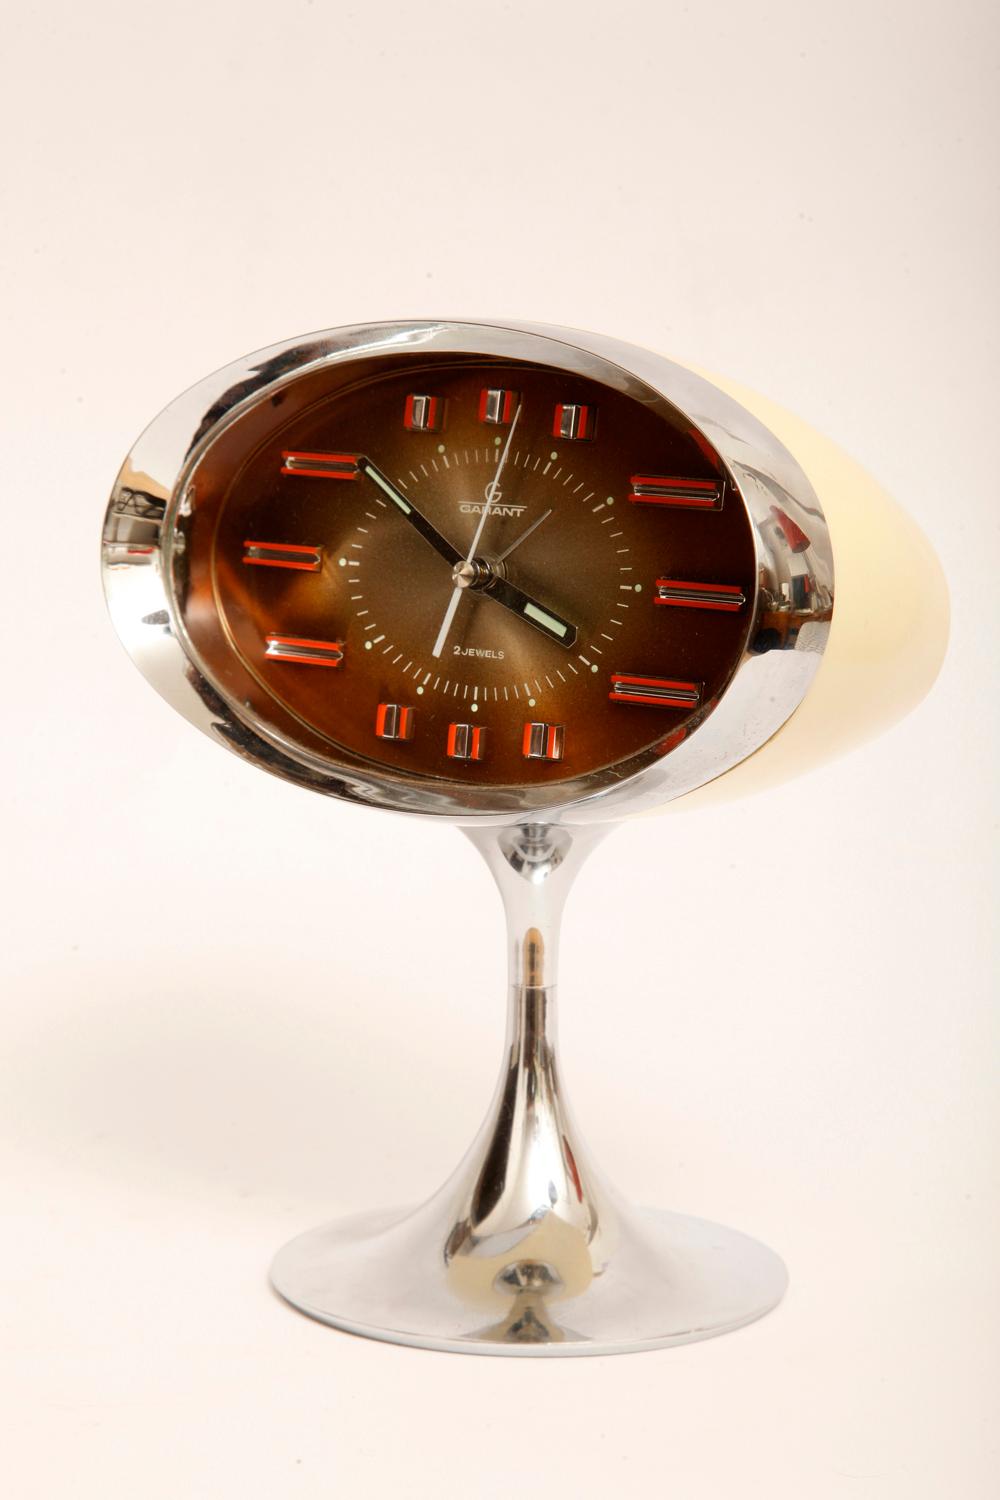 Japanese Space Age Alarm Clock Garant, Plastic and Chromed, 1970s For Sale 11